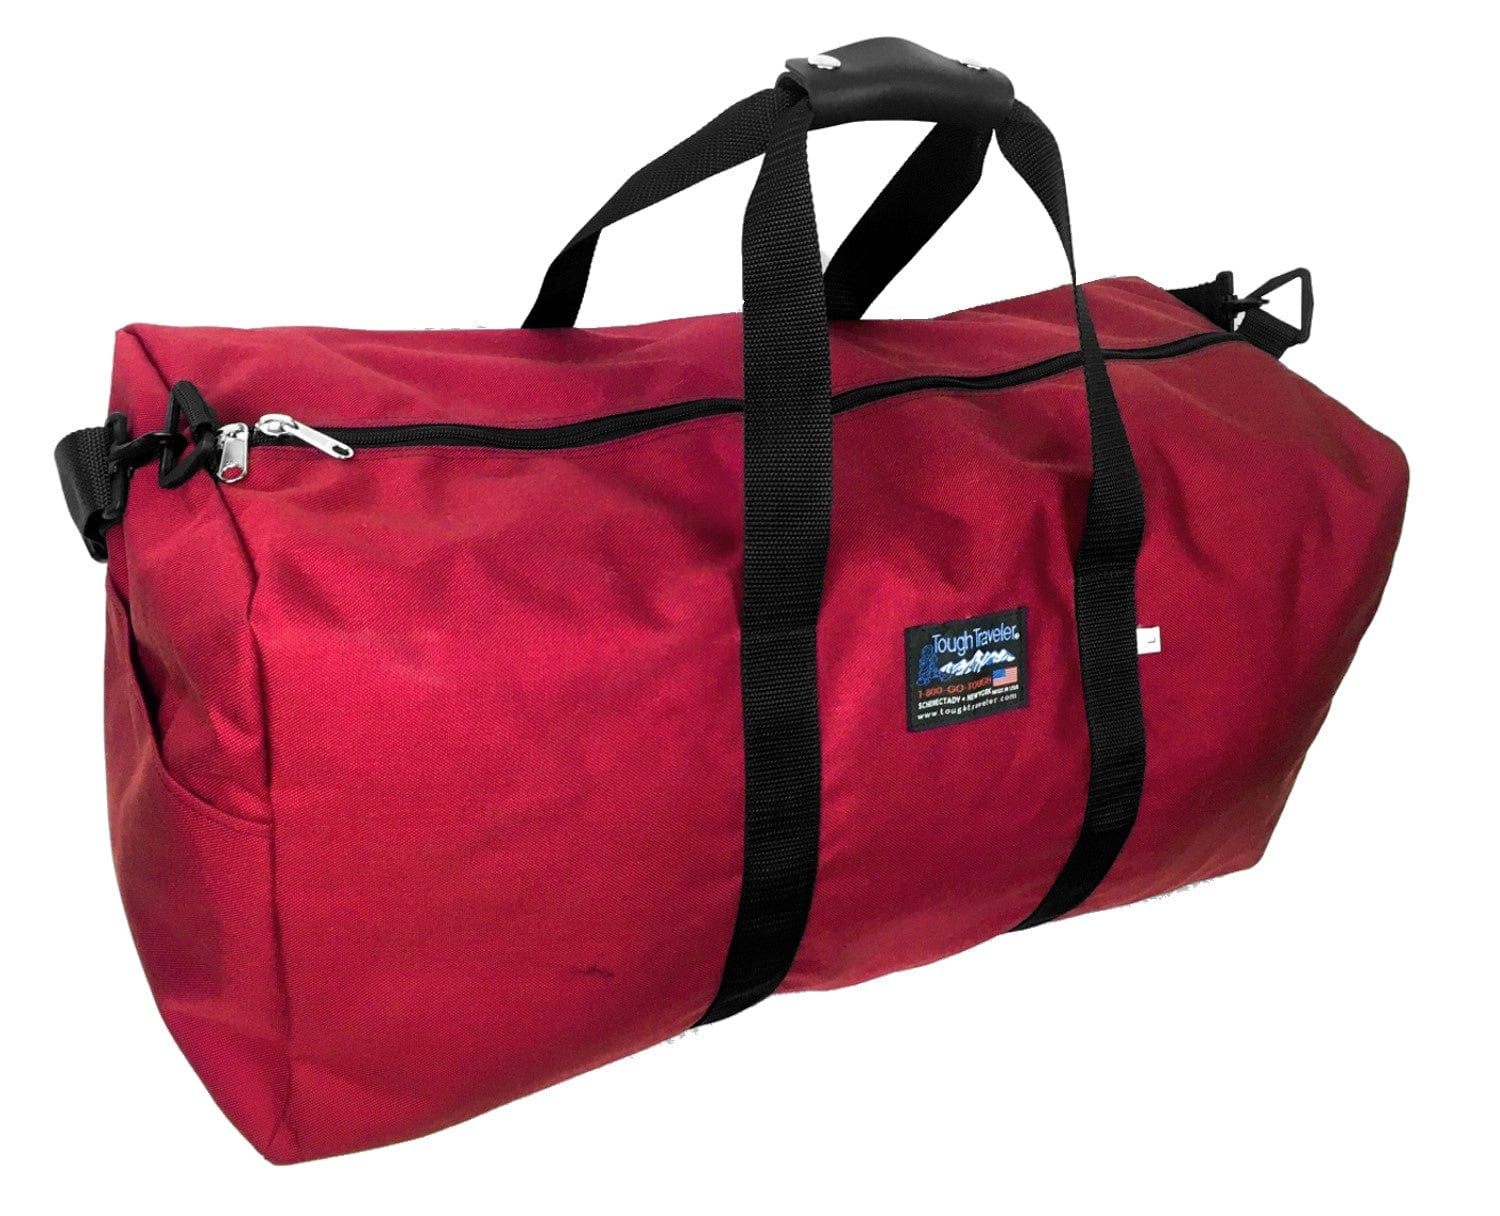  Prestige Medical Large Canvas Tote Bag, RN Red : Clothing,  Shoes & Jewelry